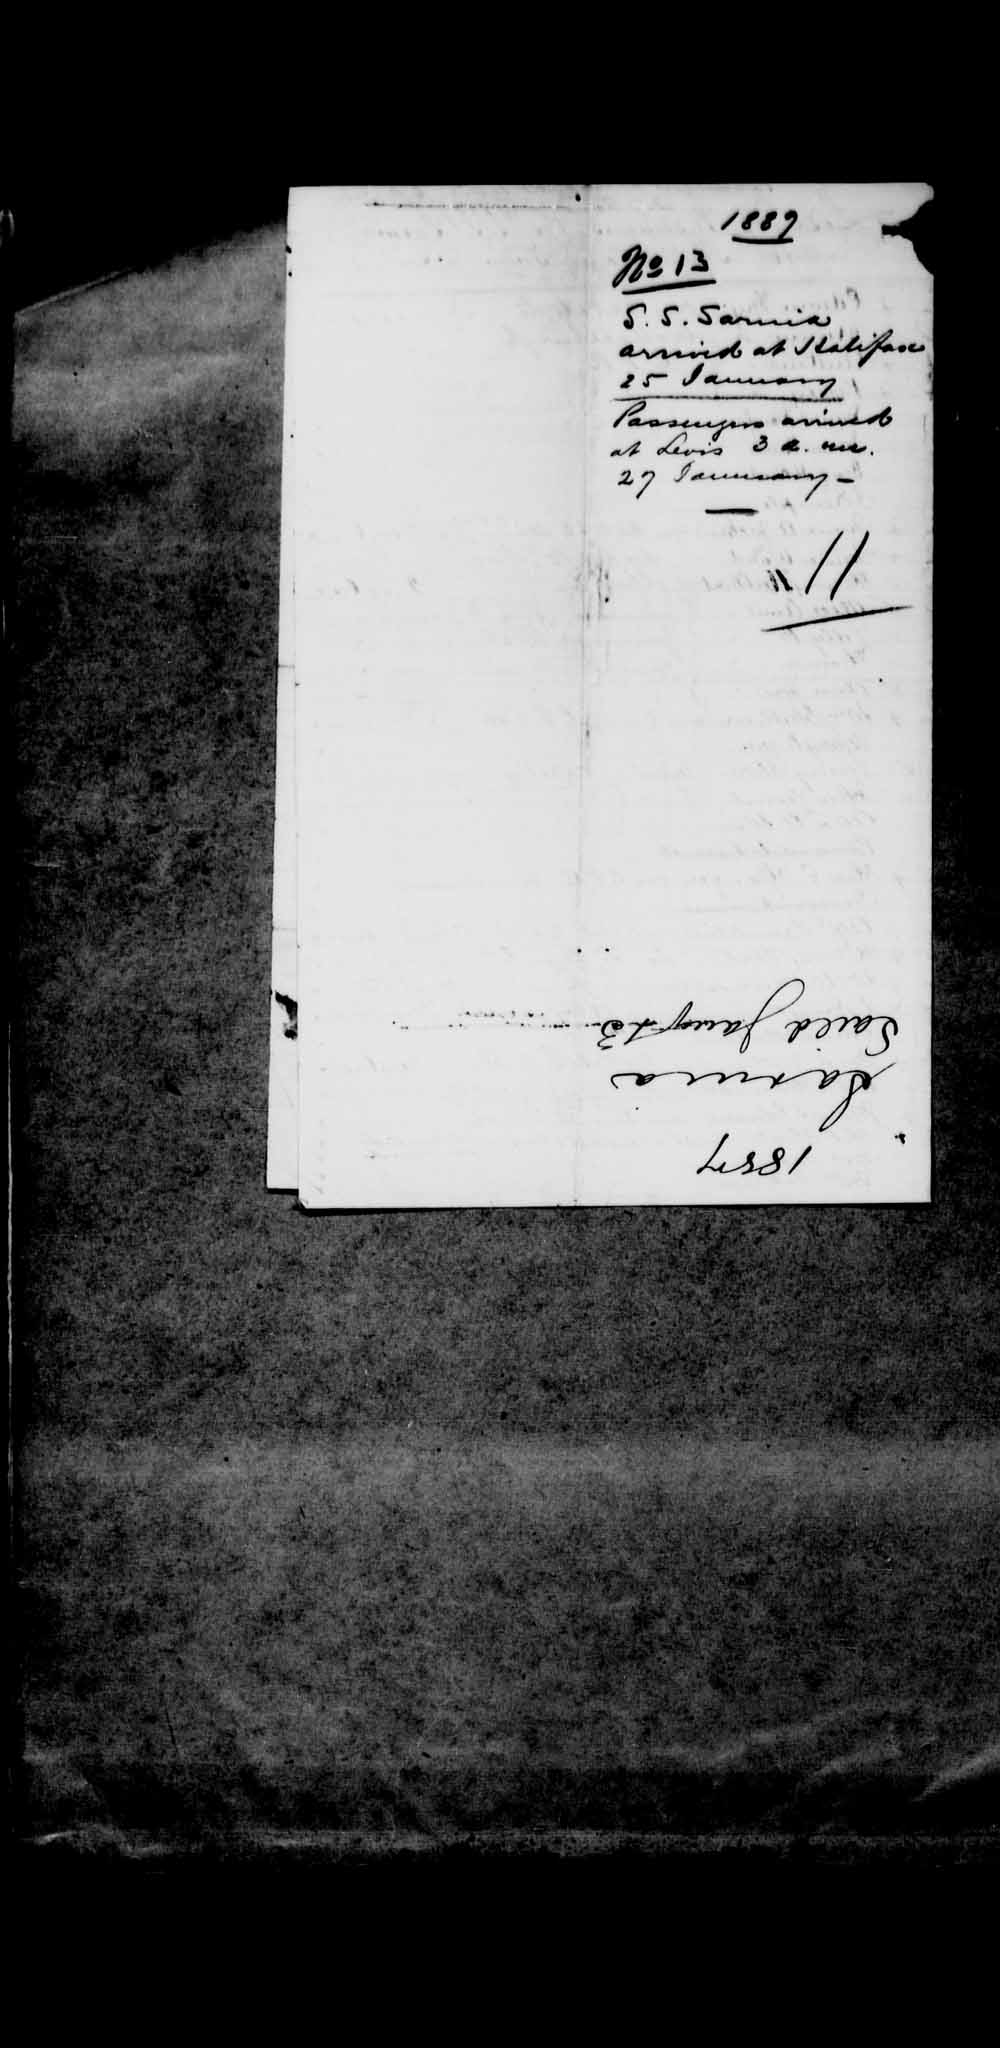 Digitized page of Passenger Lists for Image No.: e003675219